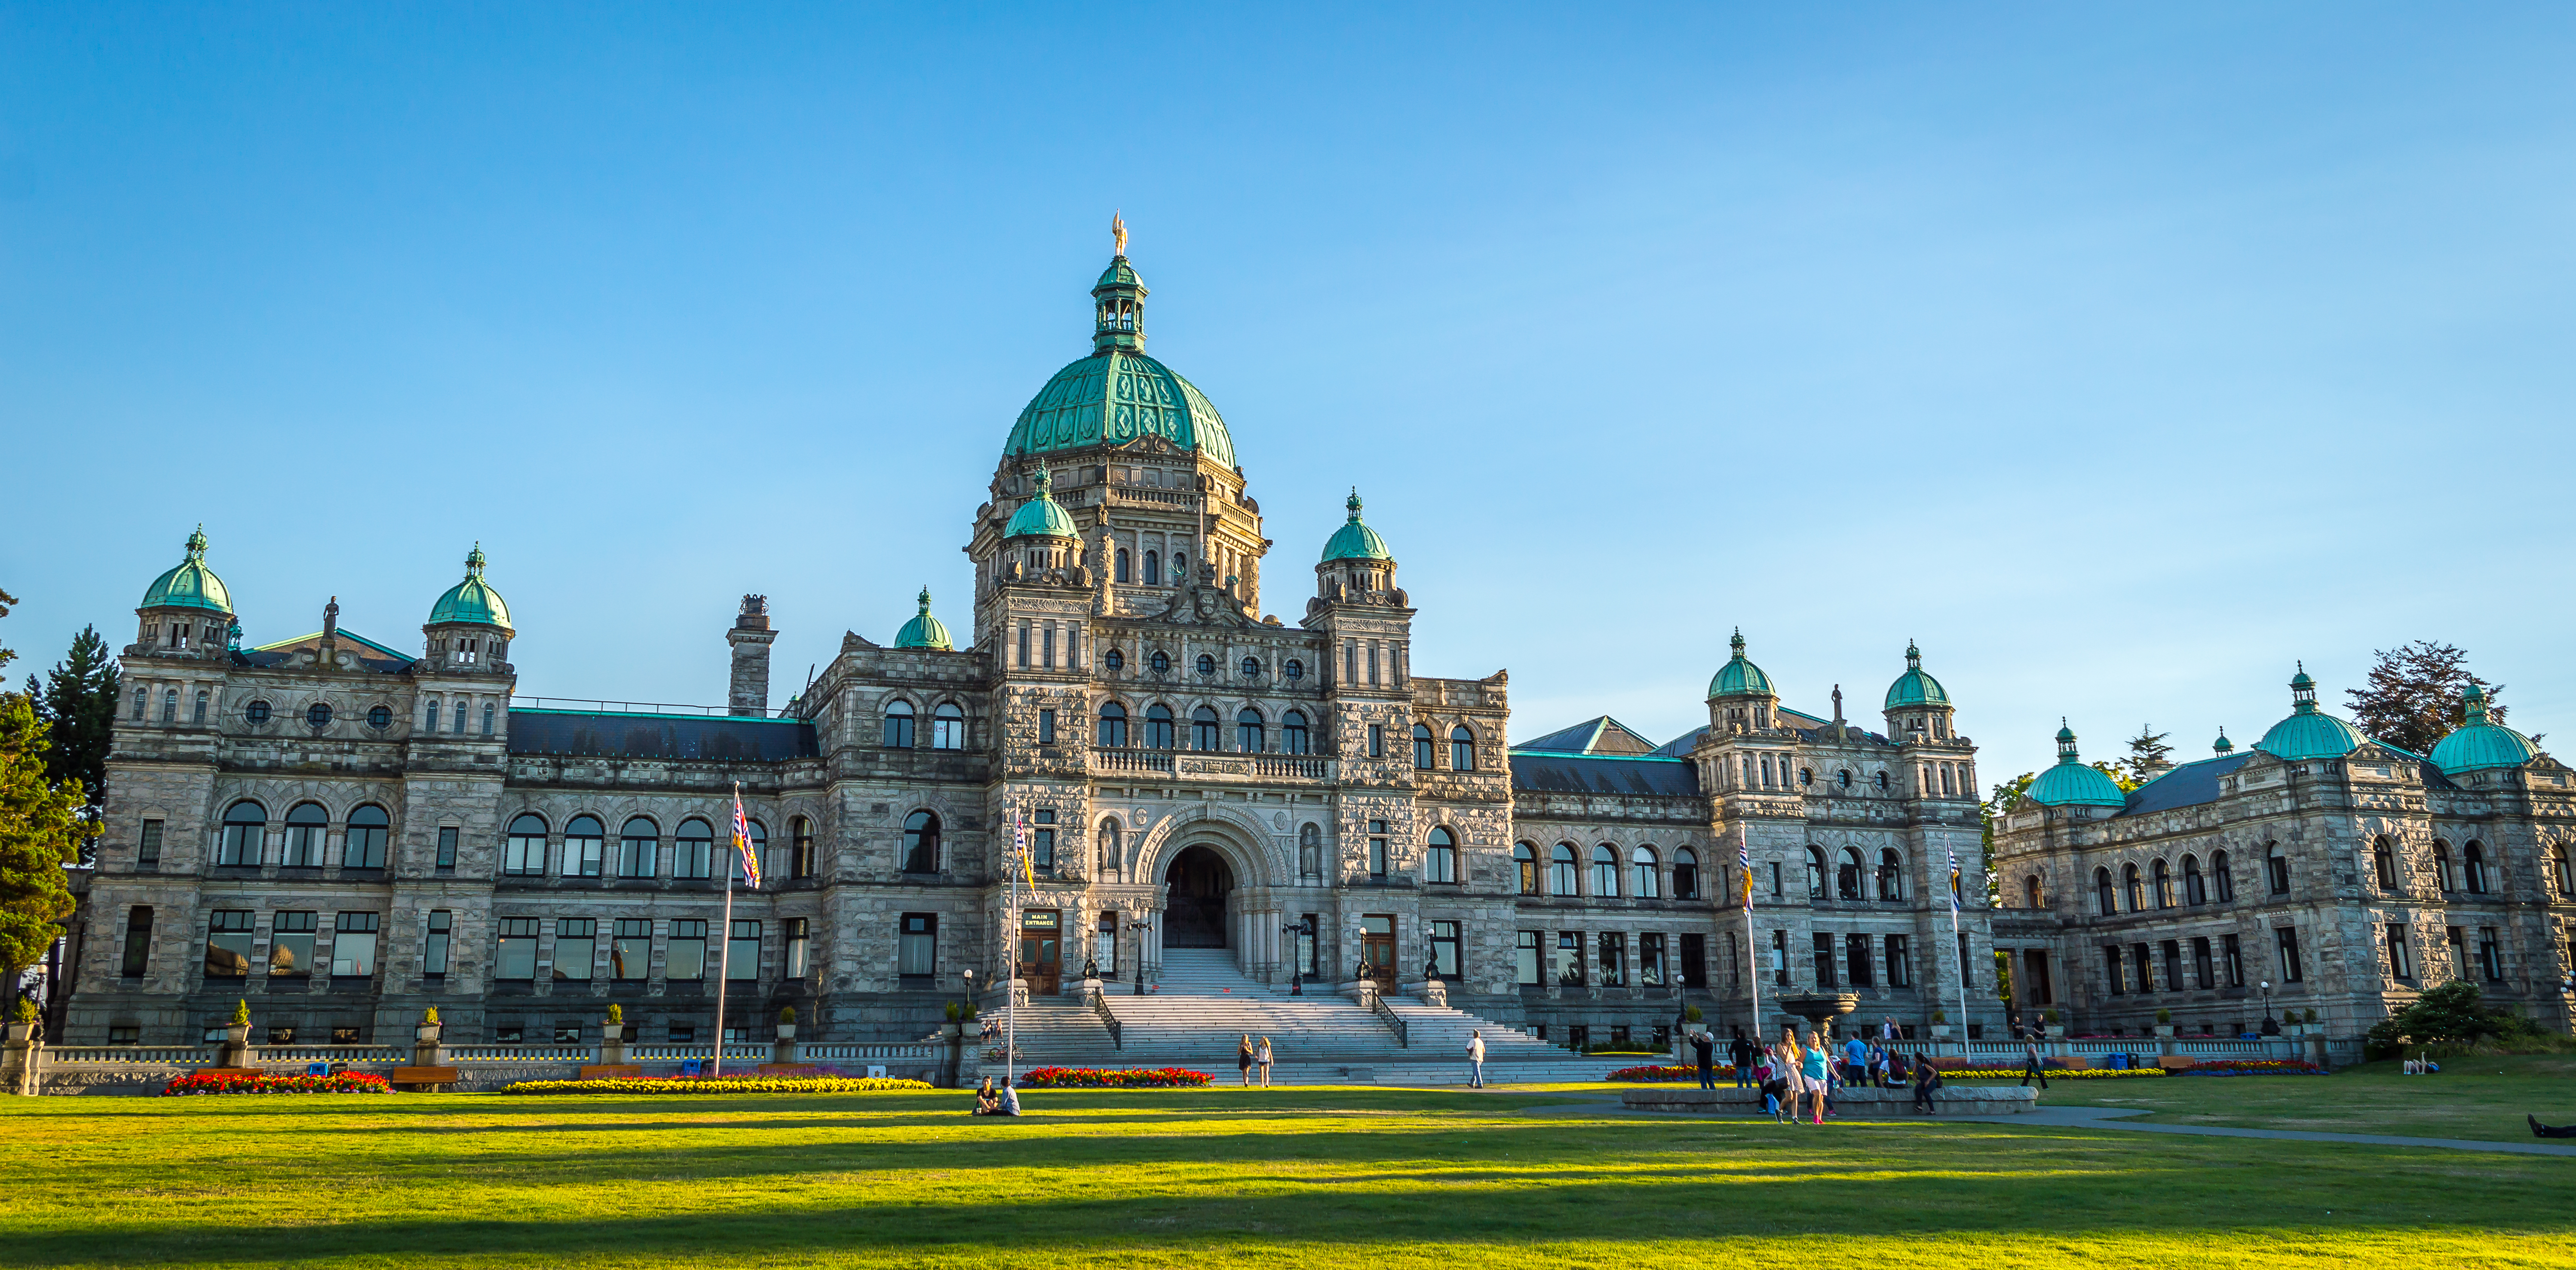 Victoria Parliament Building | High Resolution Photography